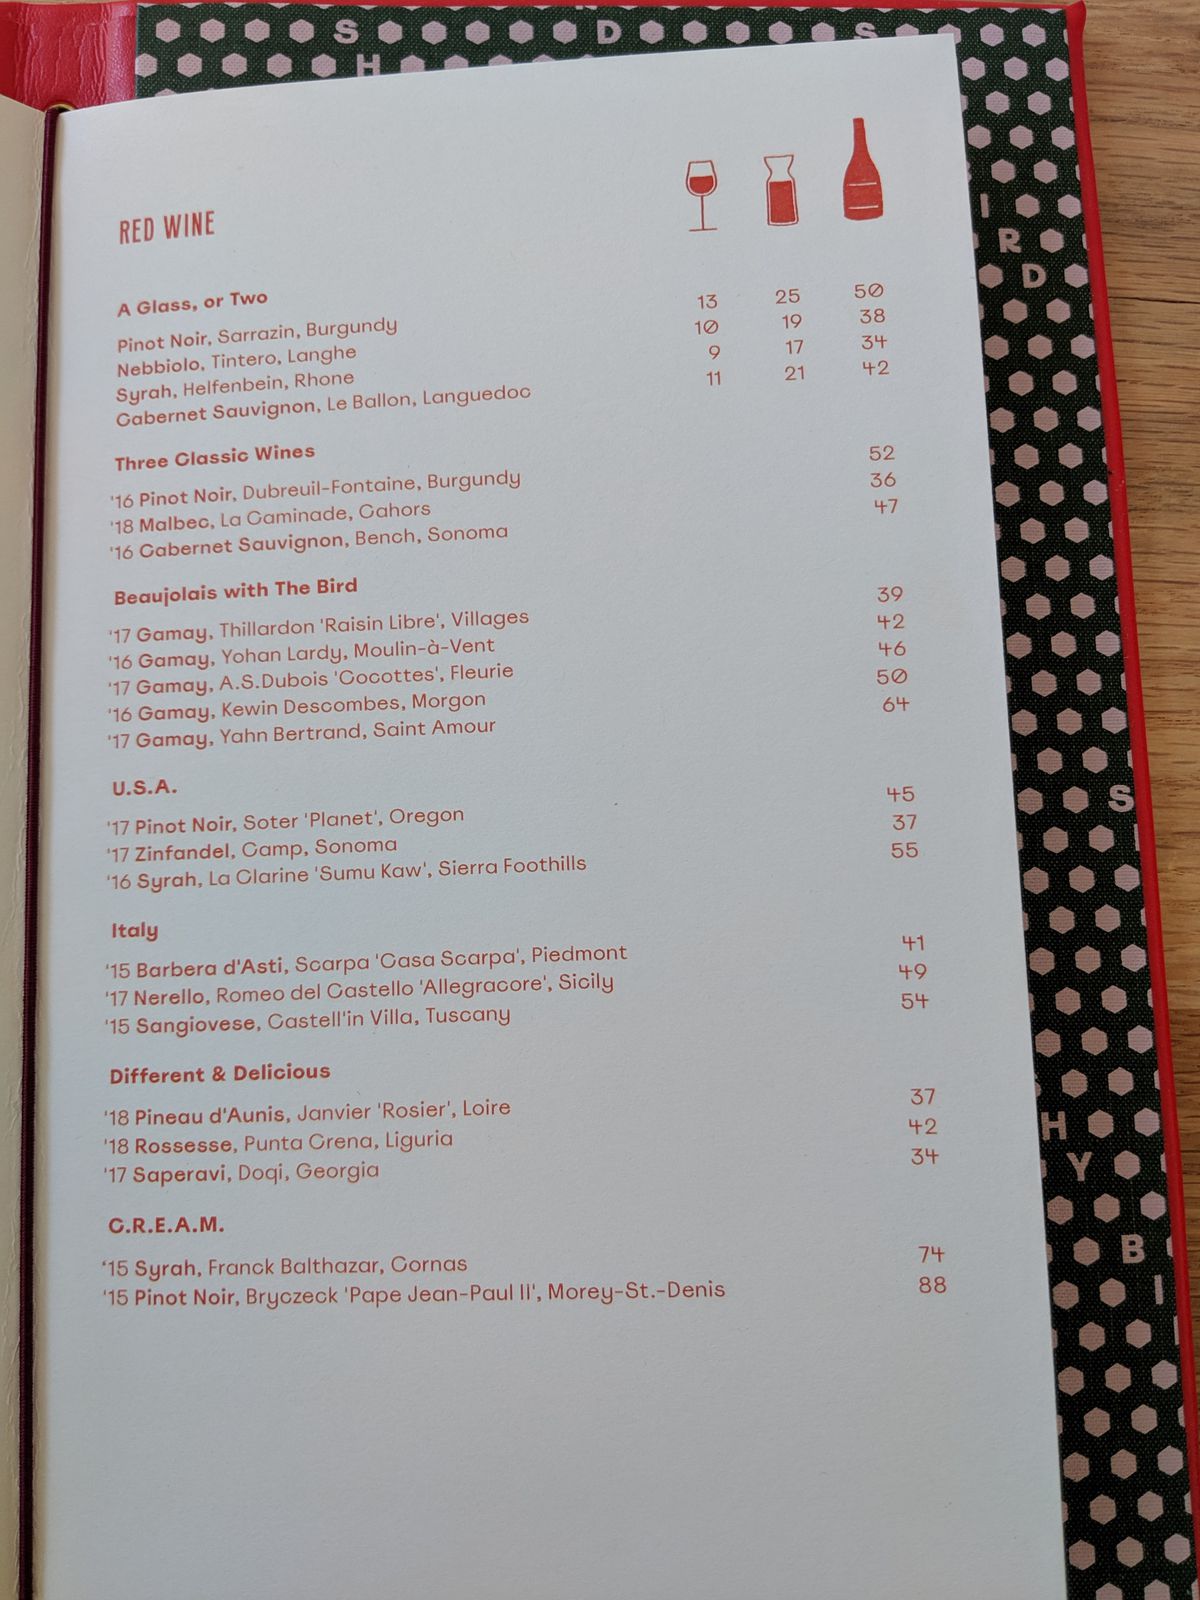 Part of the opening beverage menu for Shy Bird in Cambridge, including red wines